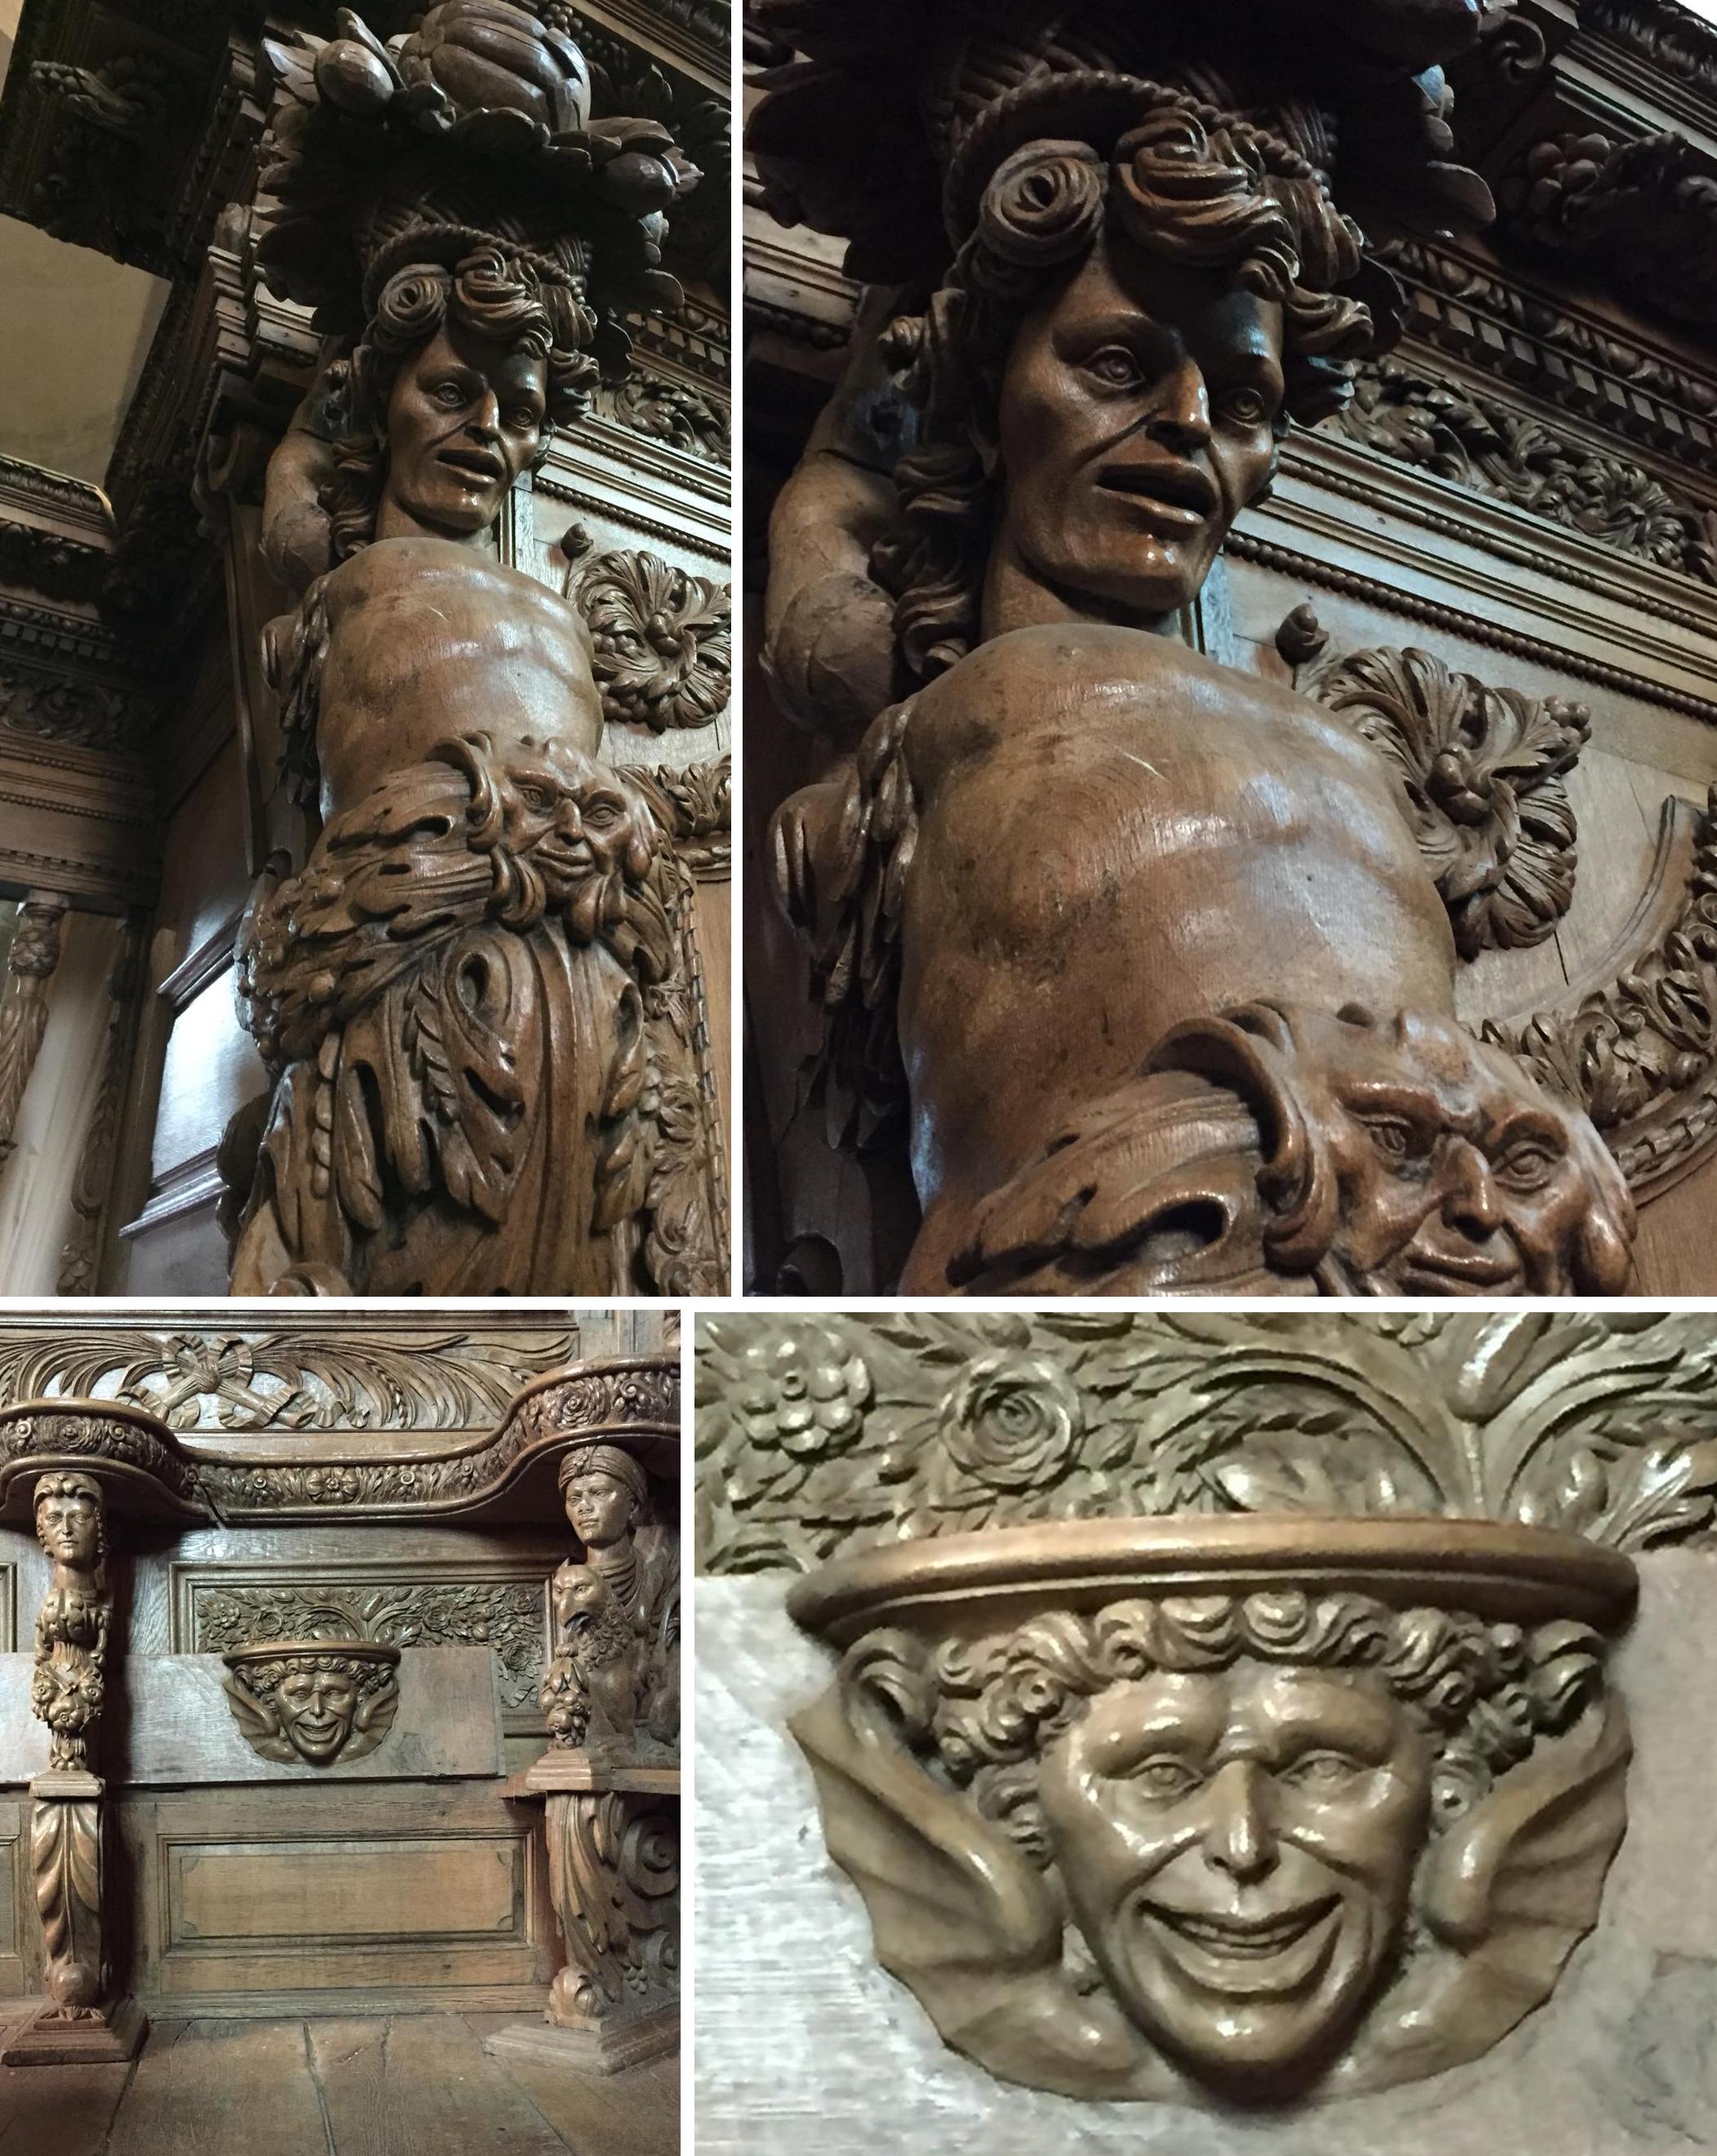 Carvings of Willem Dafoe in a 16th century church in France.